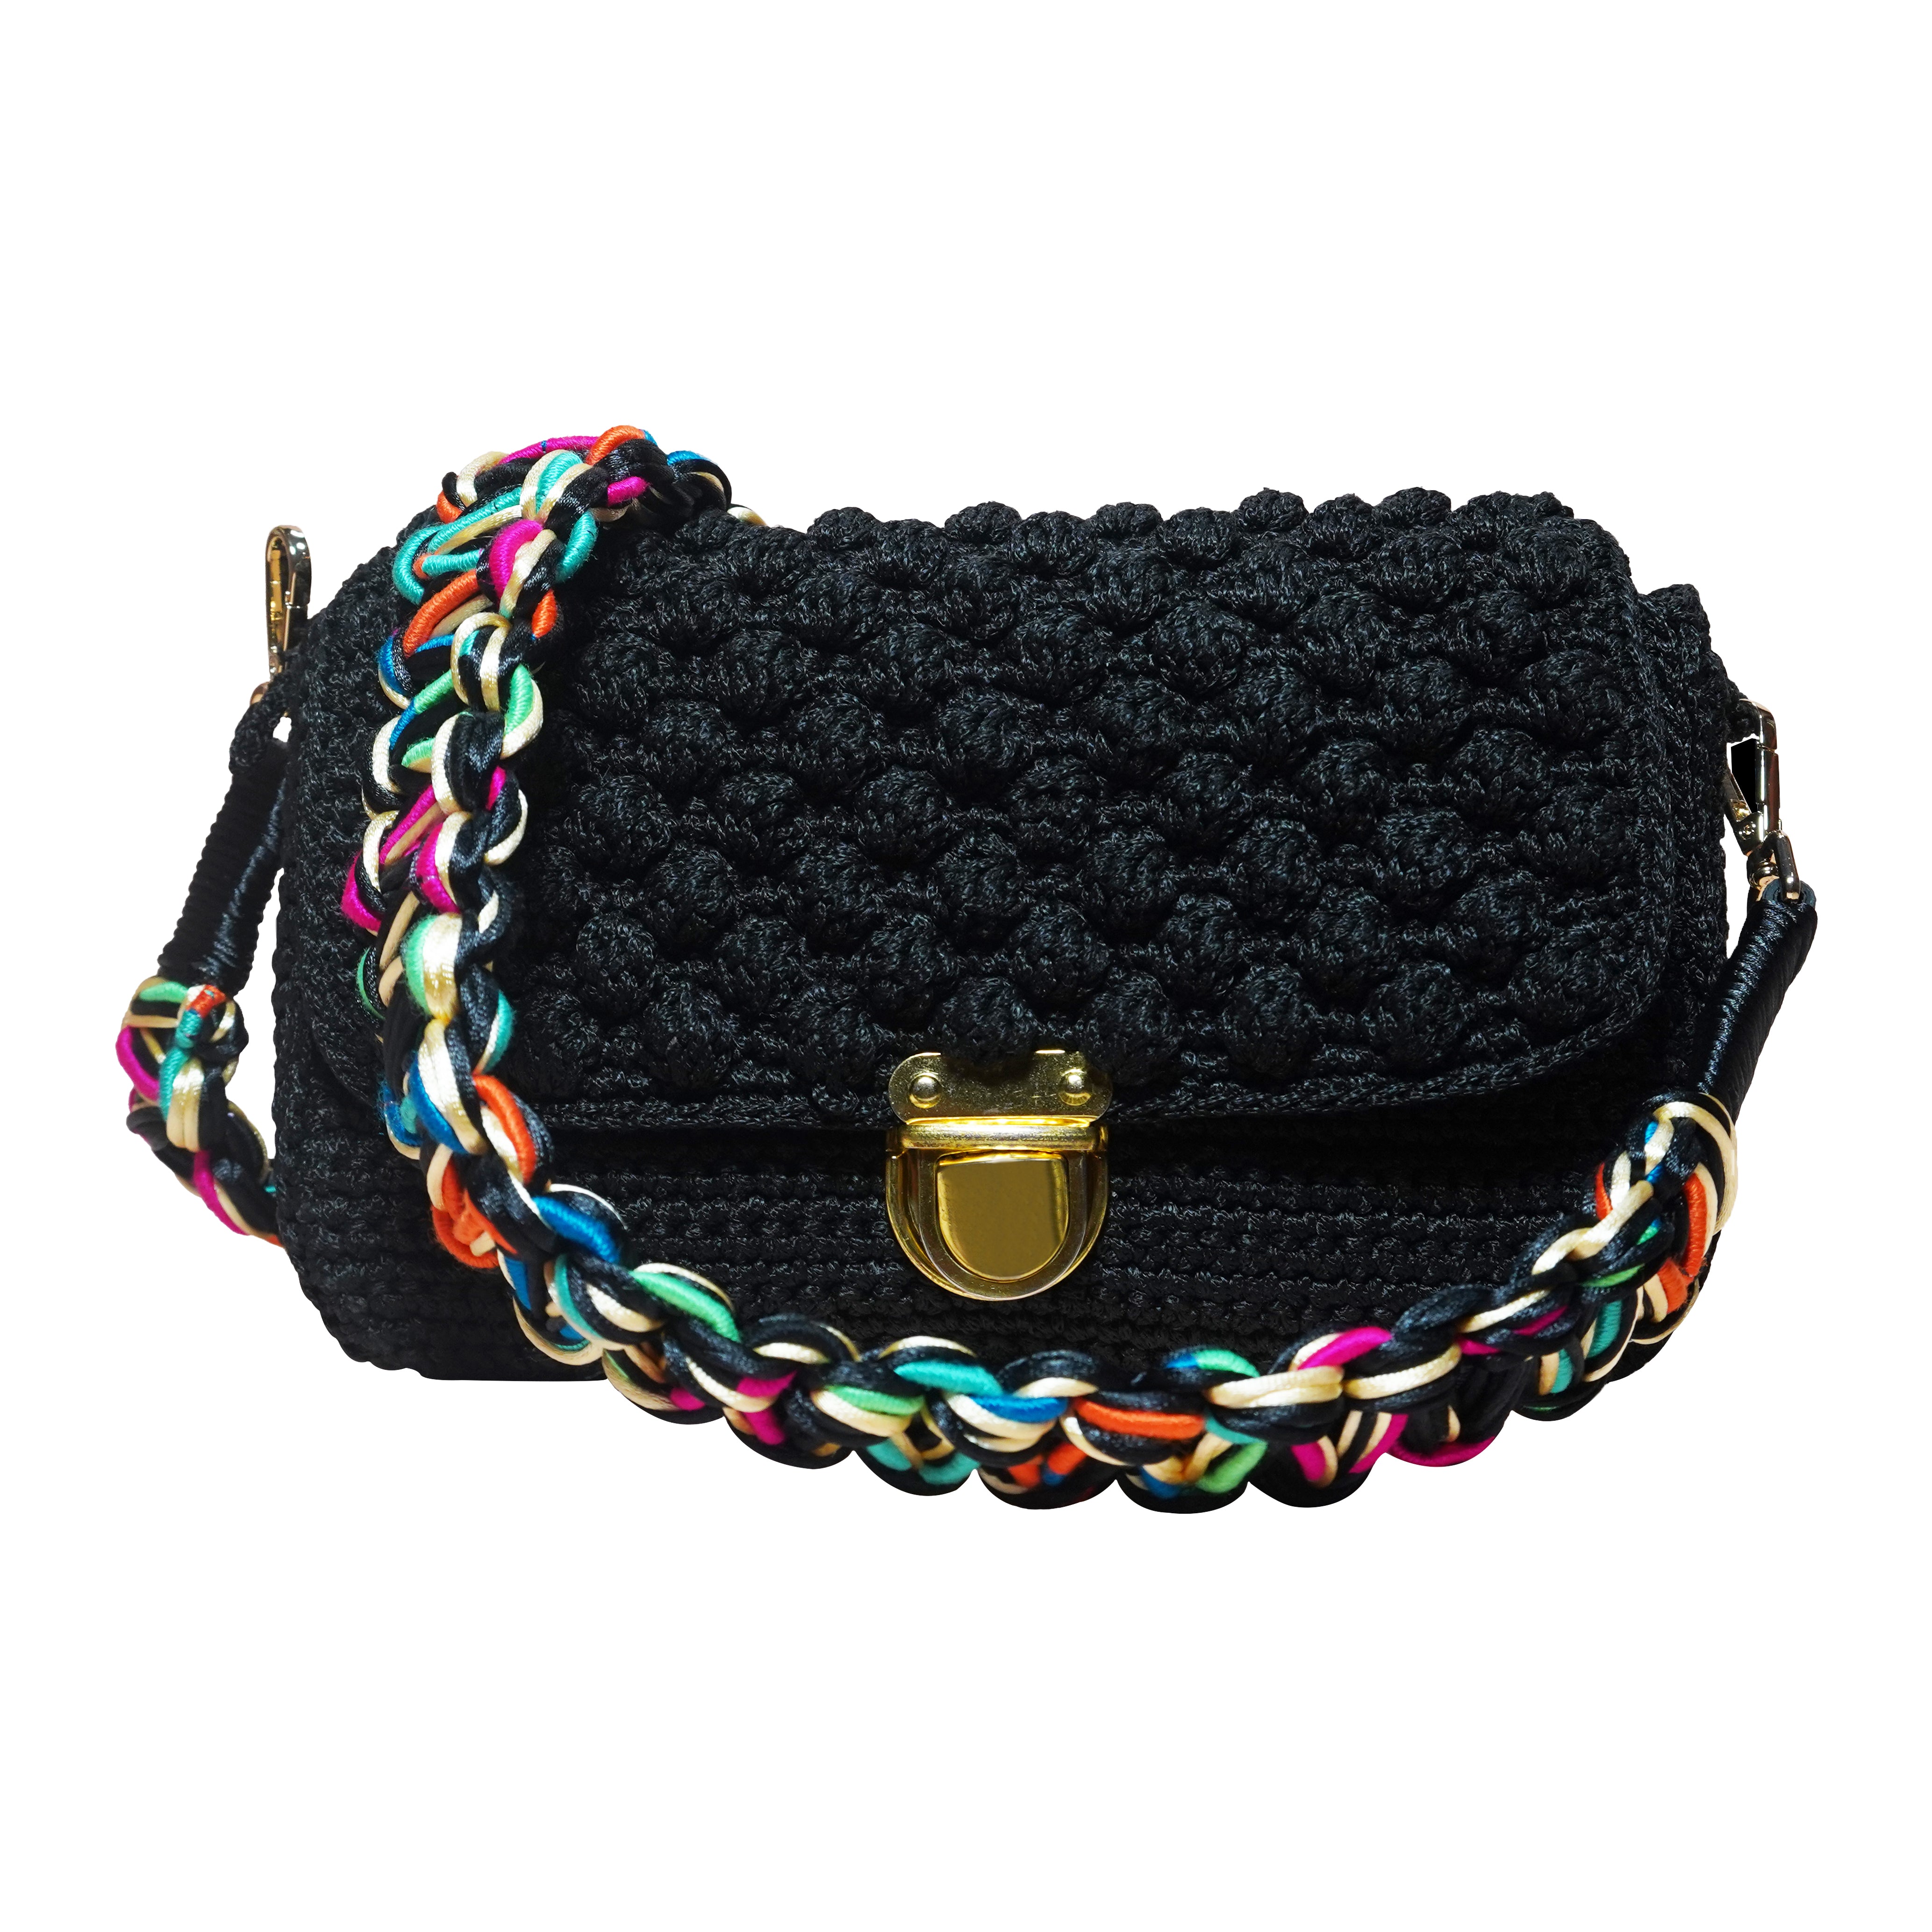 handmade black knitted crochet bag with a colourful shoulder strap